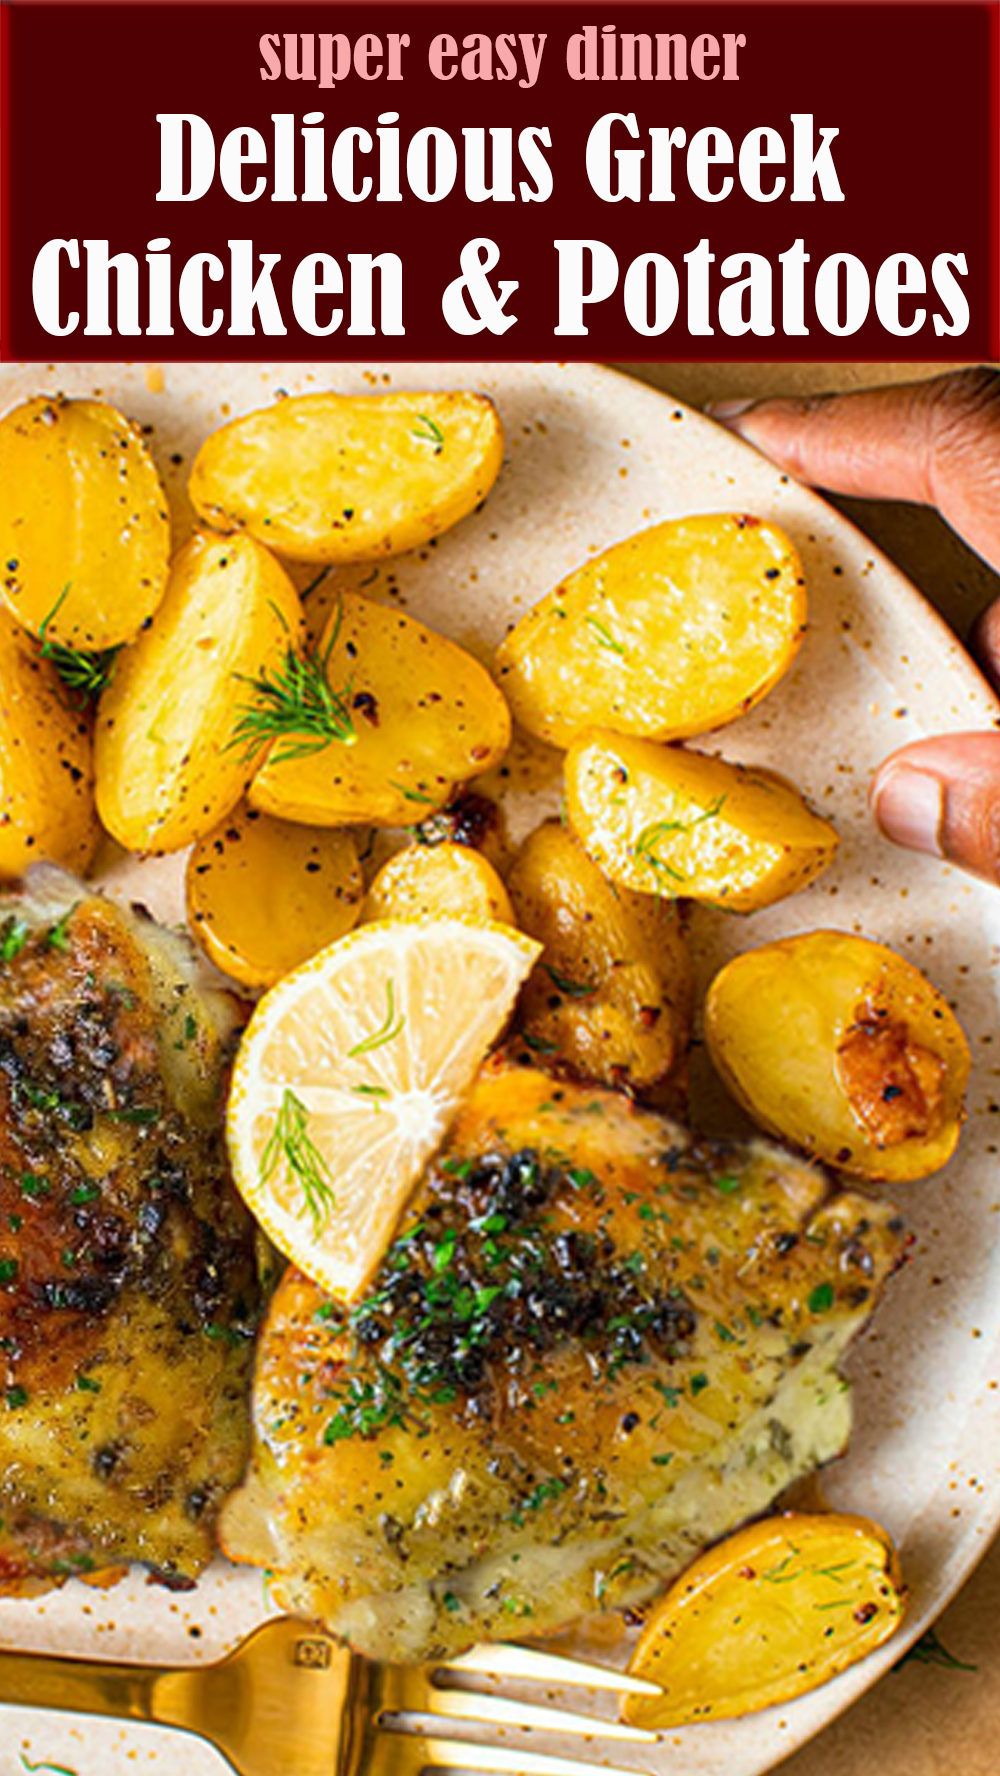 Delicious Greek Chicken and Potatoes